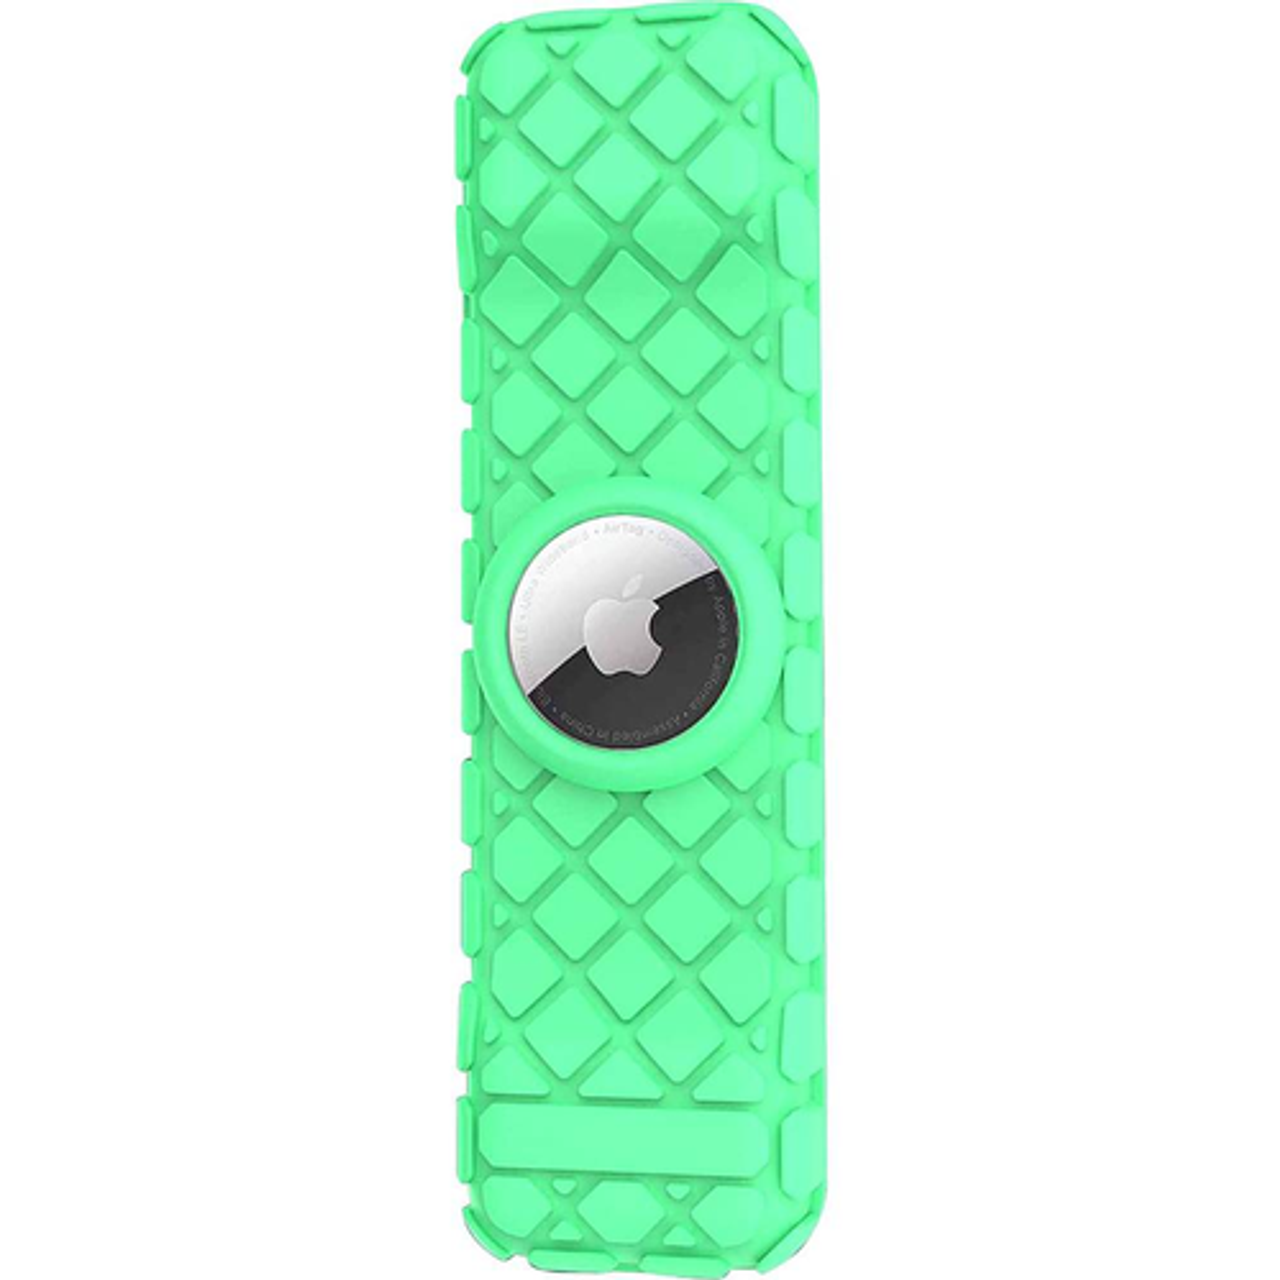 SaharaCase - Apple TV 4K Remote Silicone Case for Apple AirTag - Green Glow